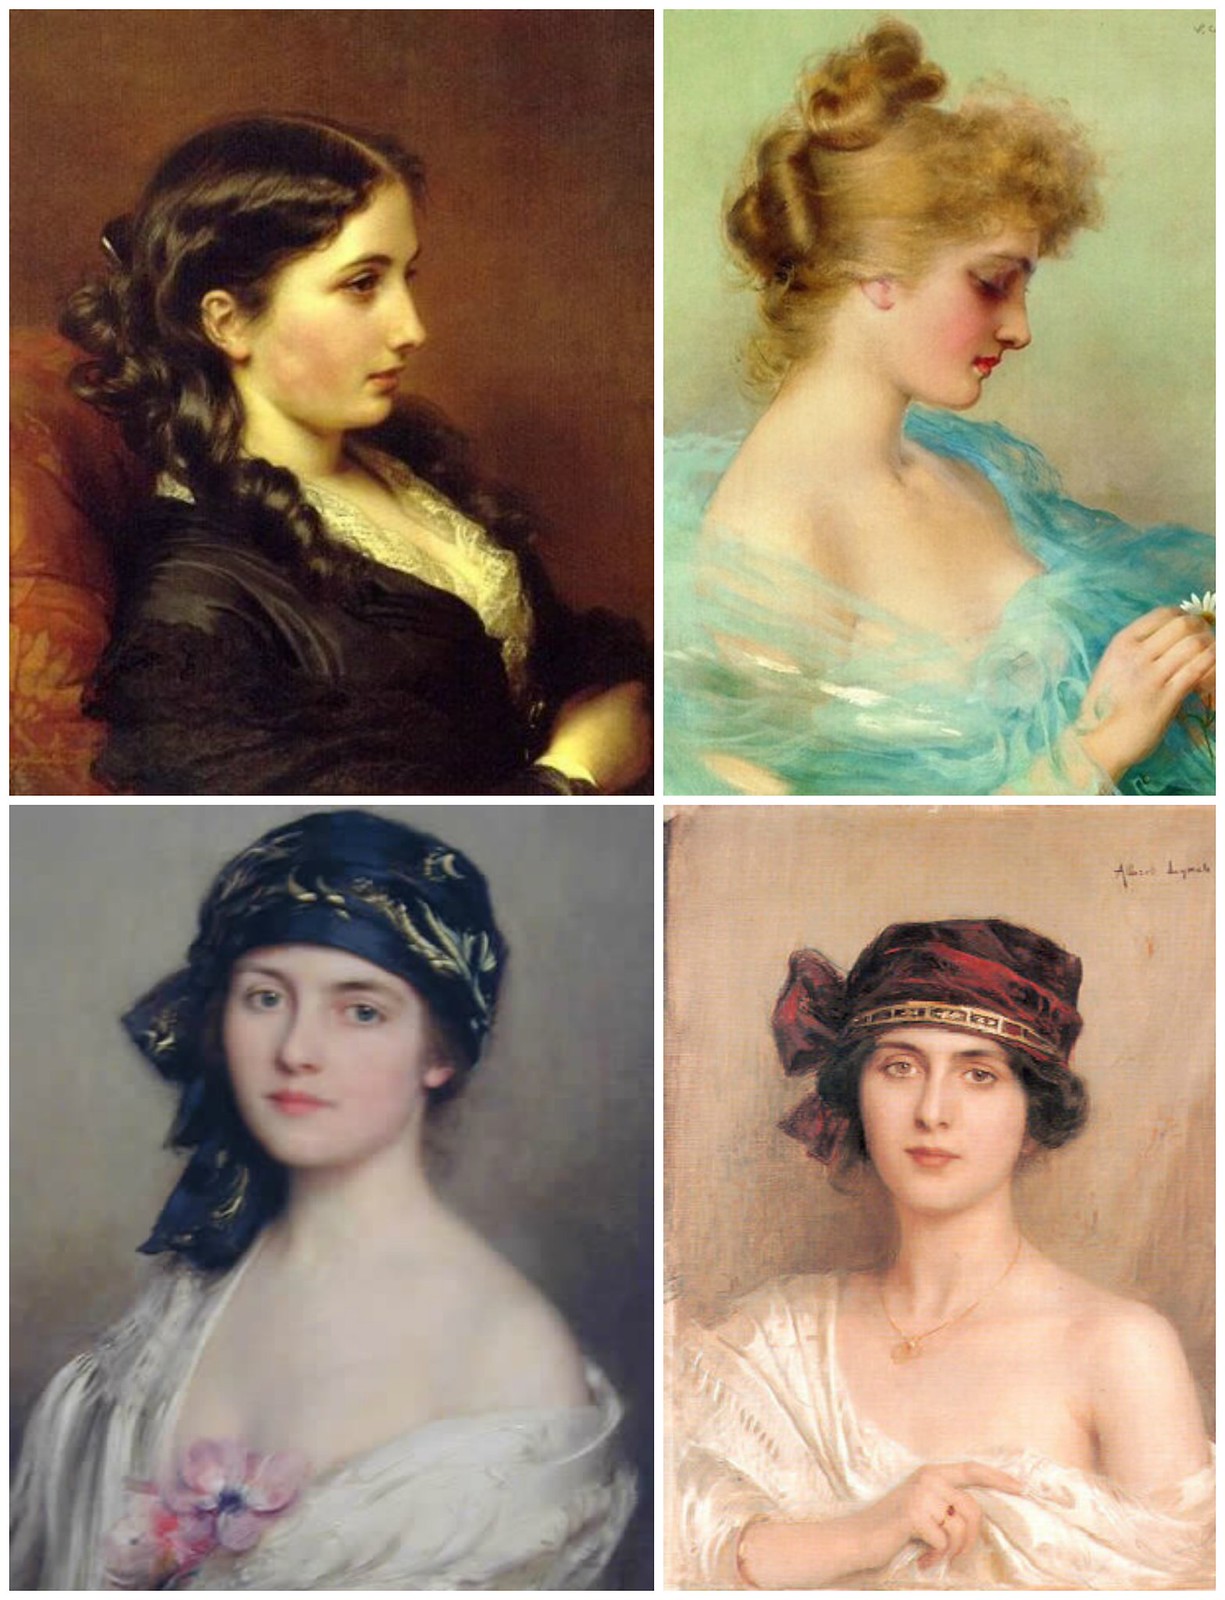 Other paintings of society women from Albert Lynch